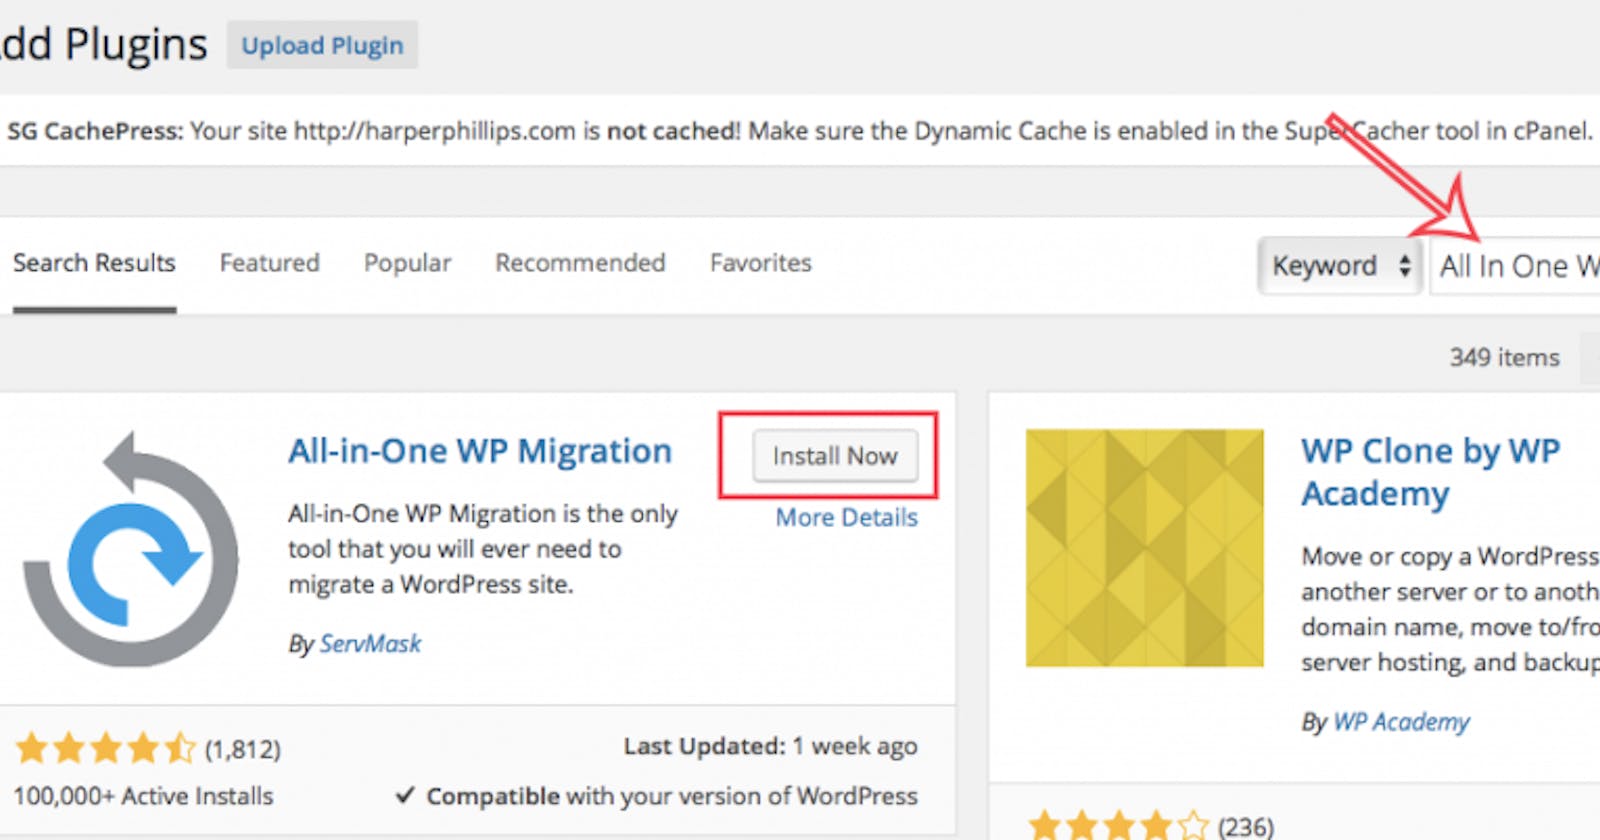 How to Move a WordPress Site to a New Domain/Host with All in One WP Migration